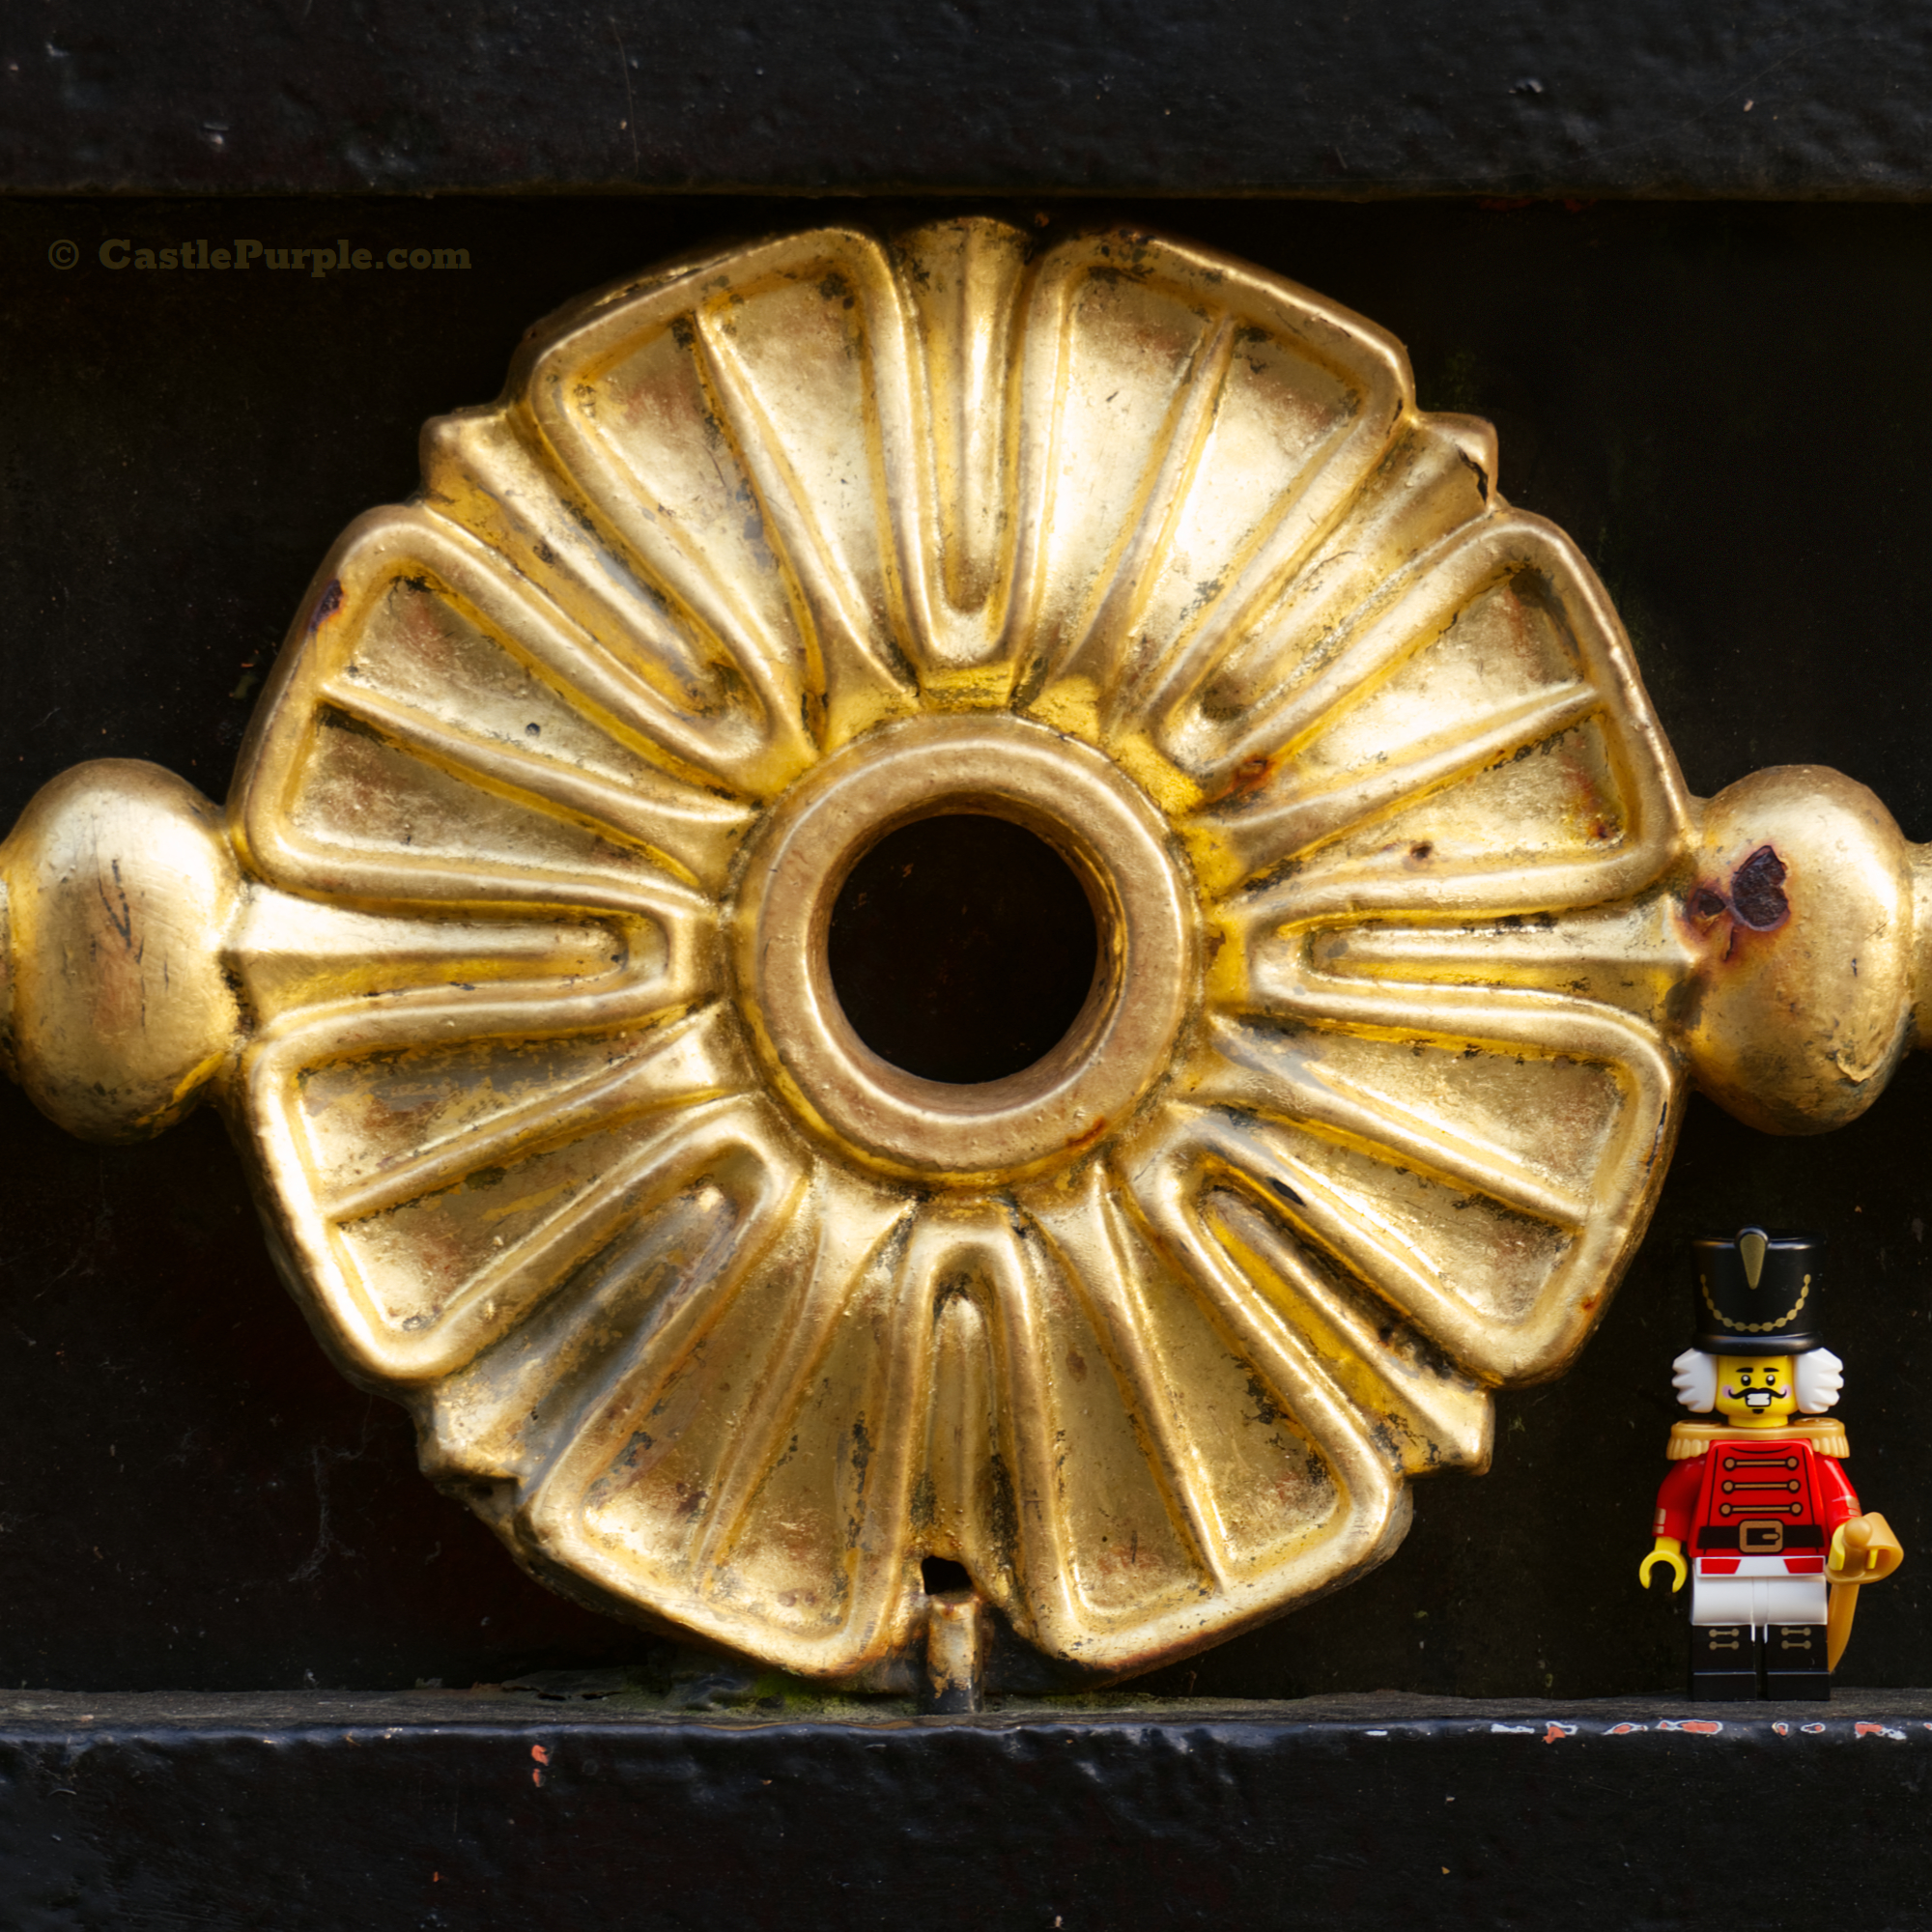 the Lego Nutcracker minifigure pictured next to a shiny gold metal decorative flower (part of a metal gate).